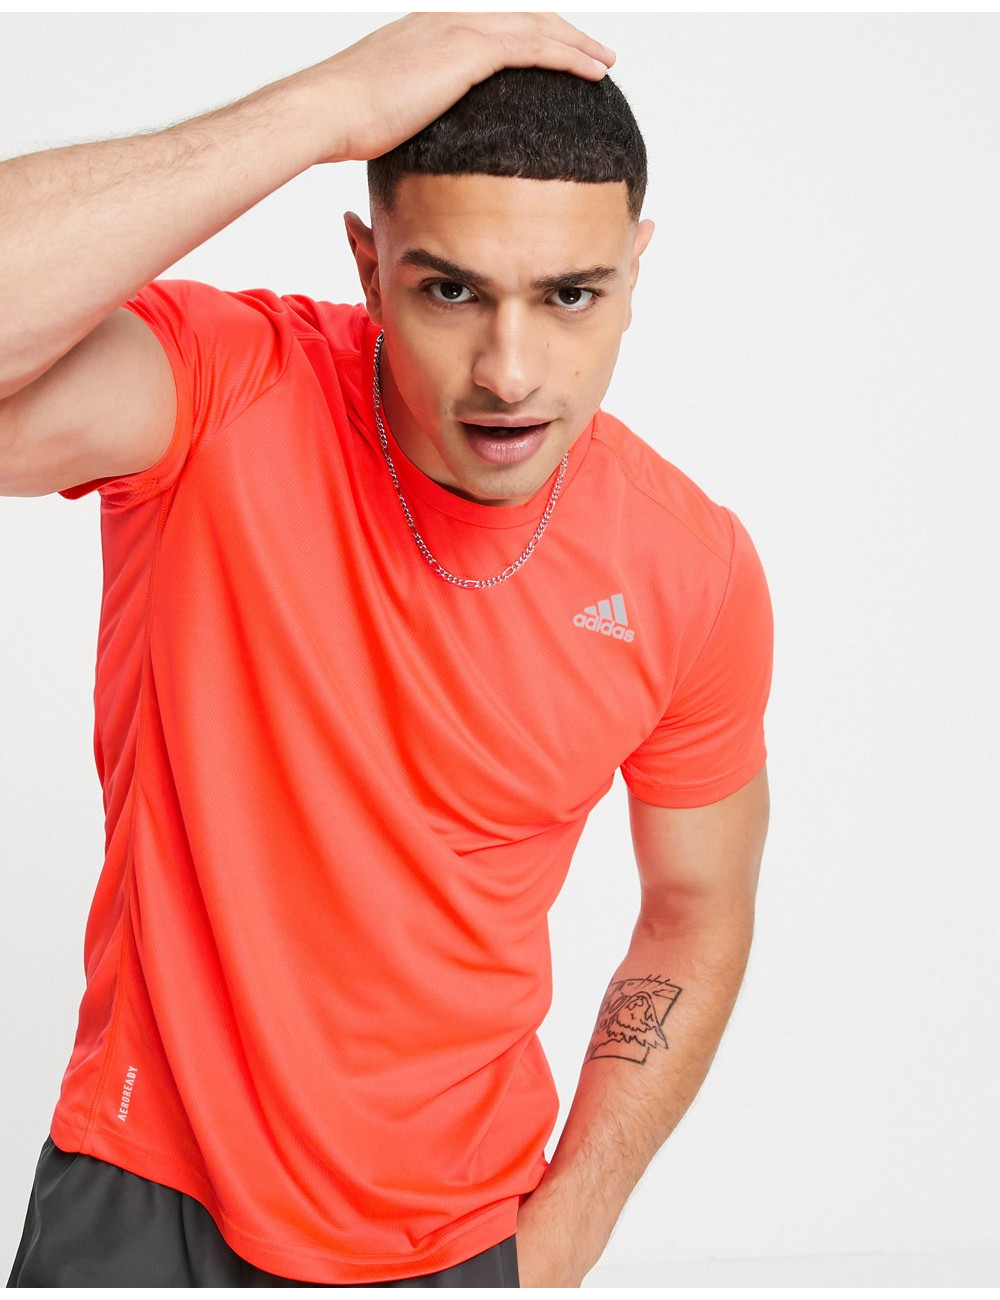 adidas Running t-shirt in red